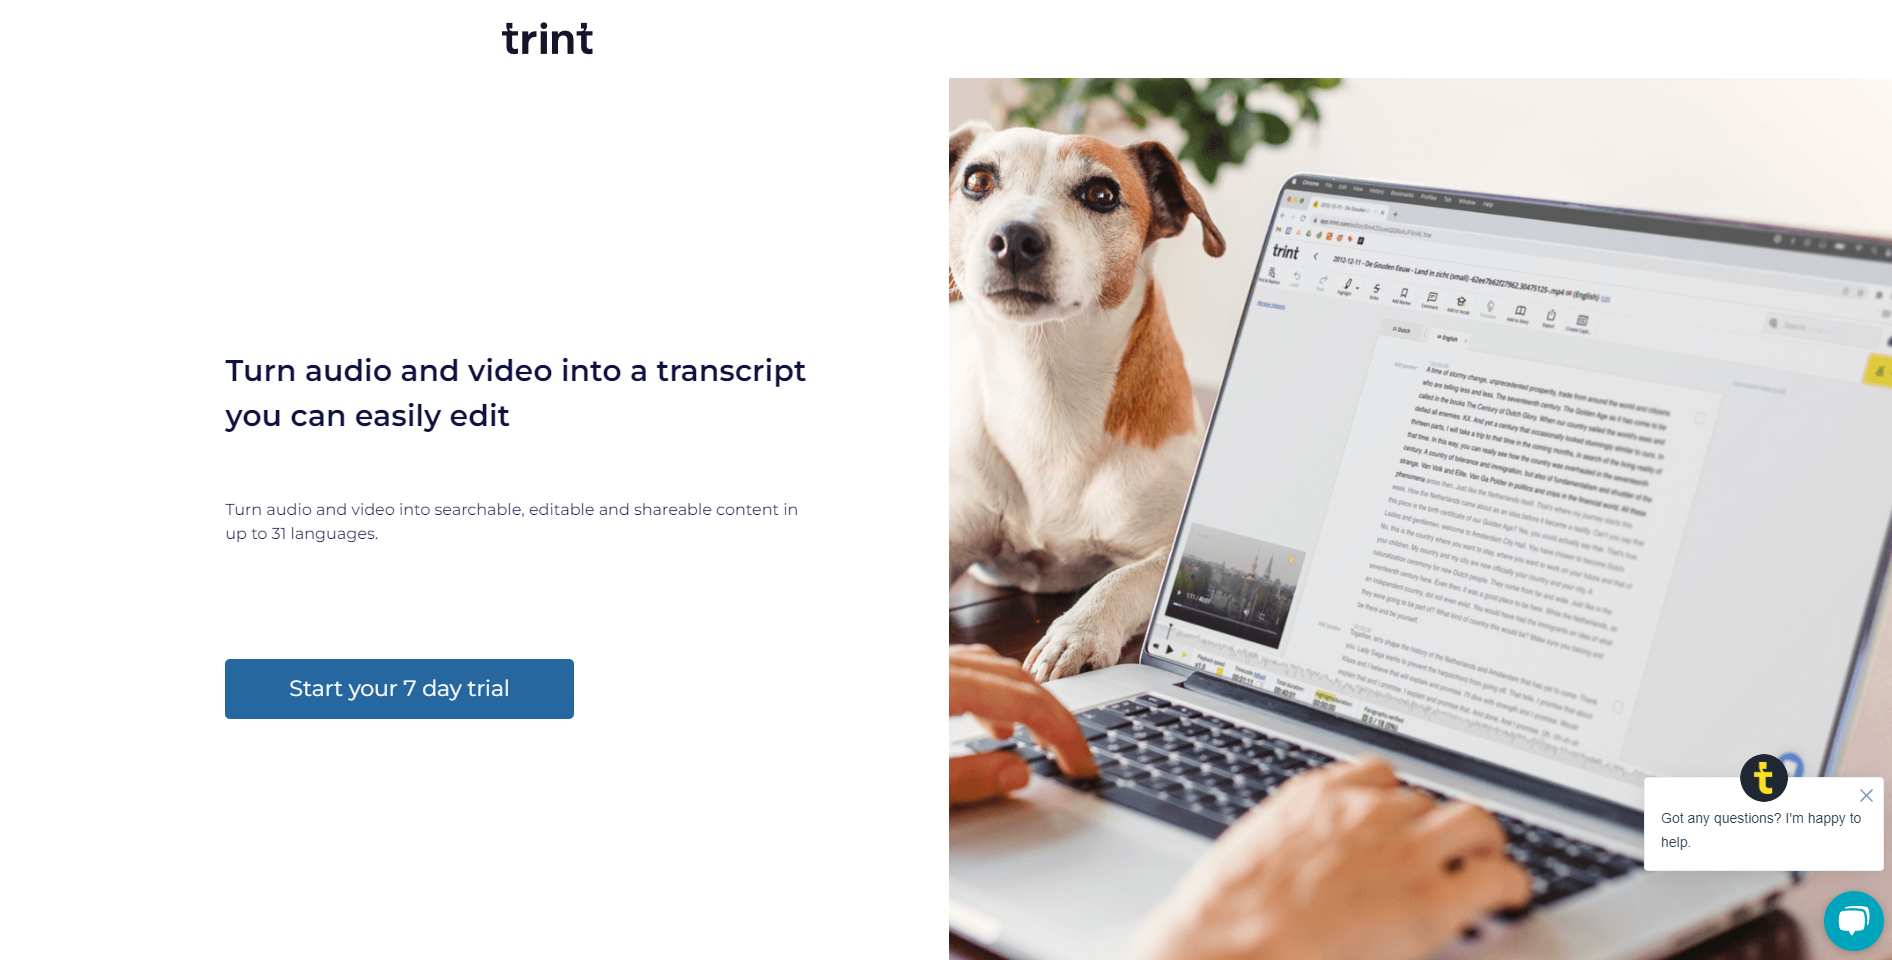 Trint best for editing and organizing meetings